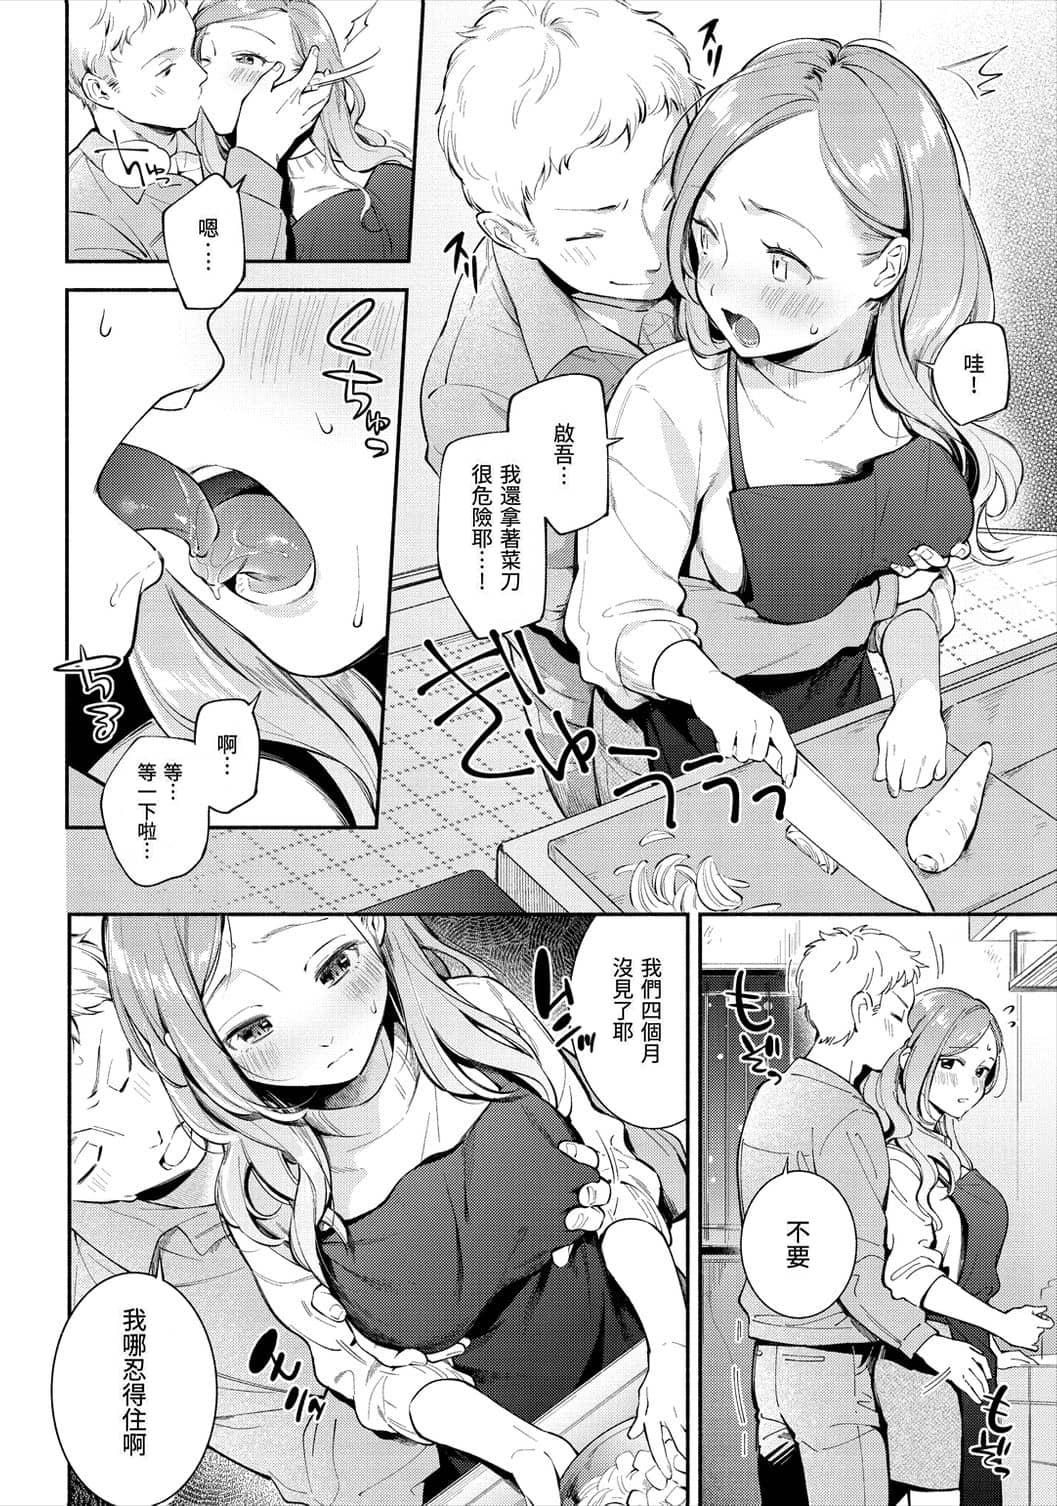 Asses 歡迎回來 Gonzo - Page 8